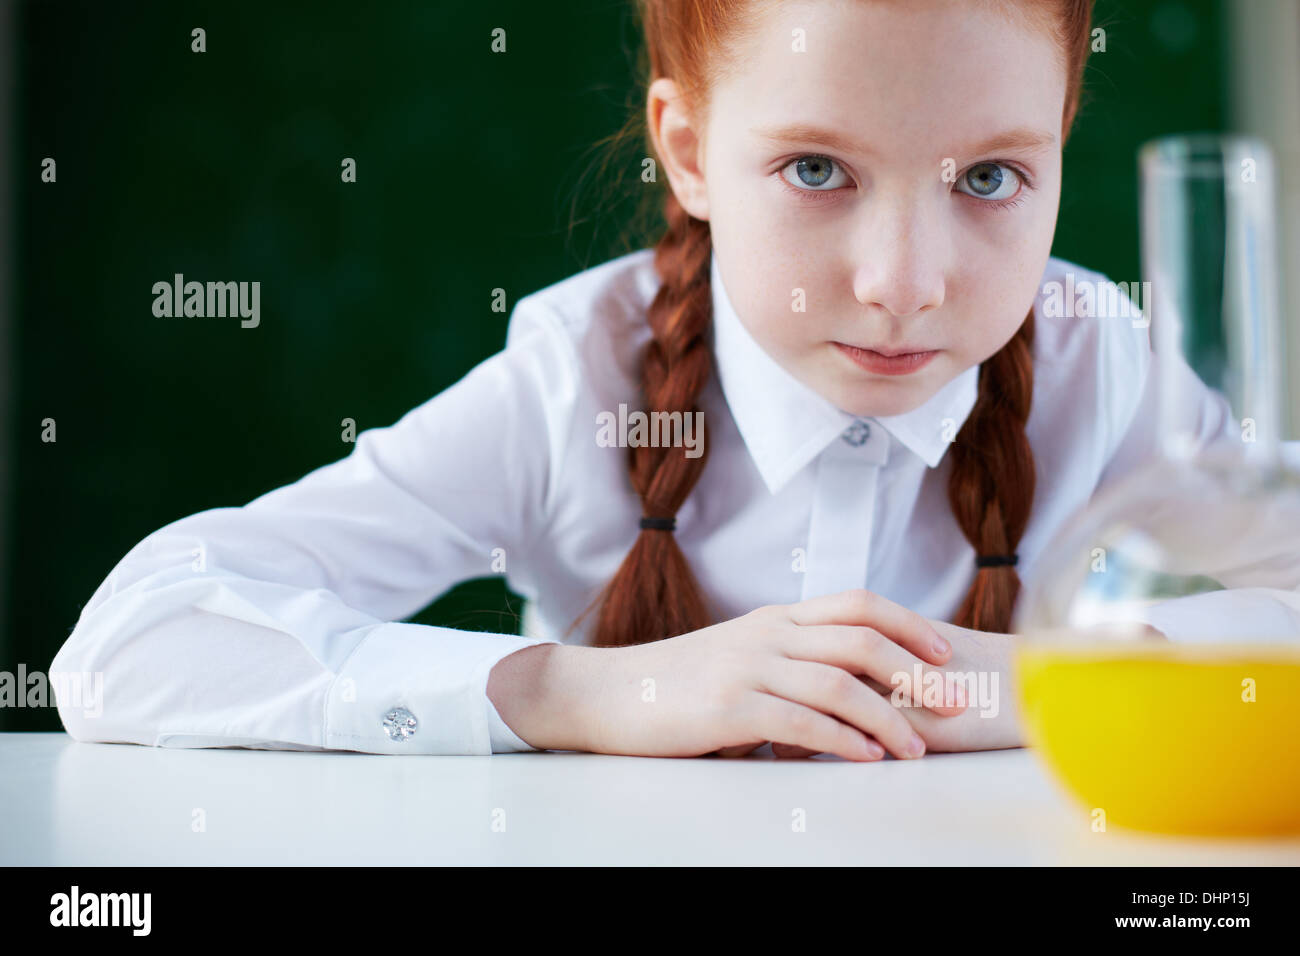 Portrait of schoolgirl sitting at workplace and looking at camera with chemical liquid in front Stock Photo